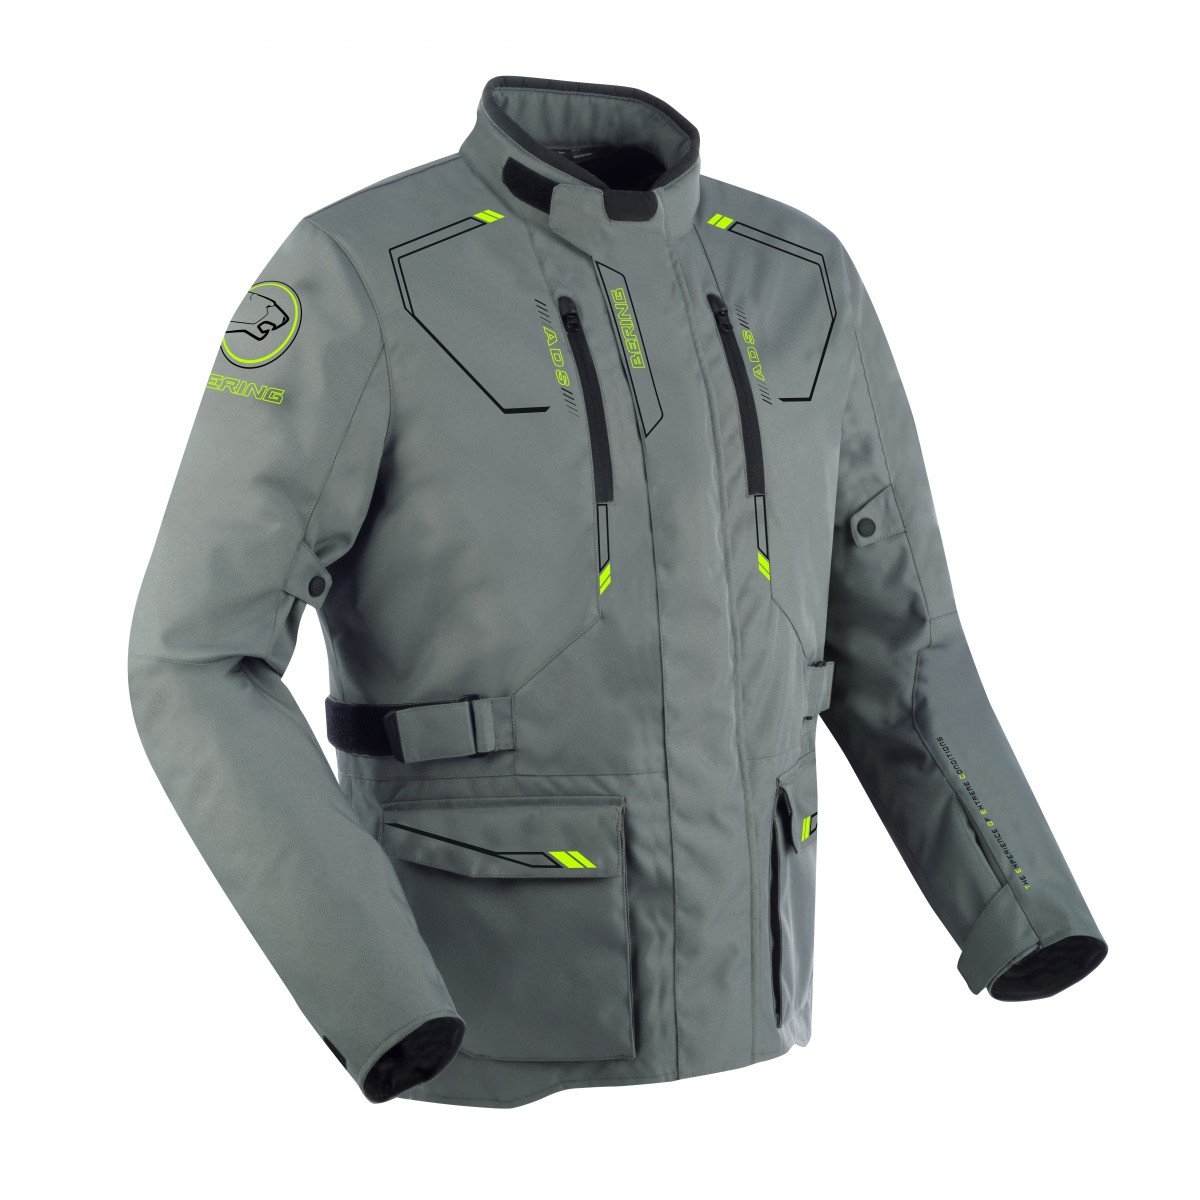 Image of Bering Voyager Jacket Gray Size L ID 3660815169537